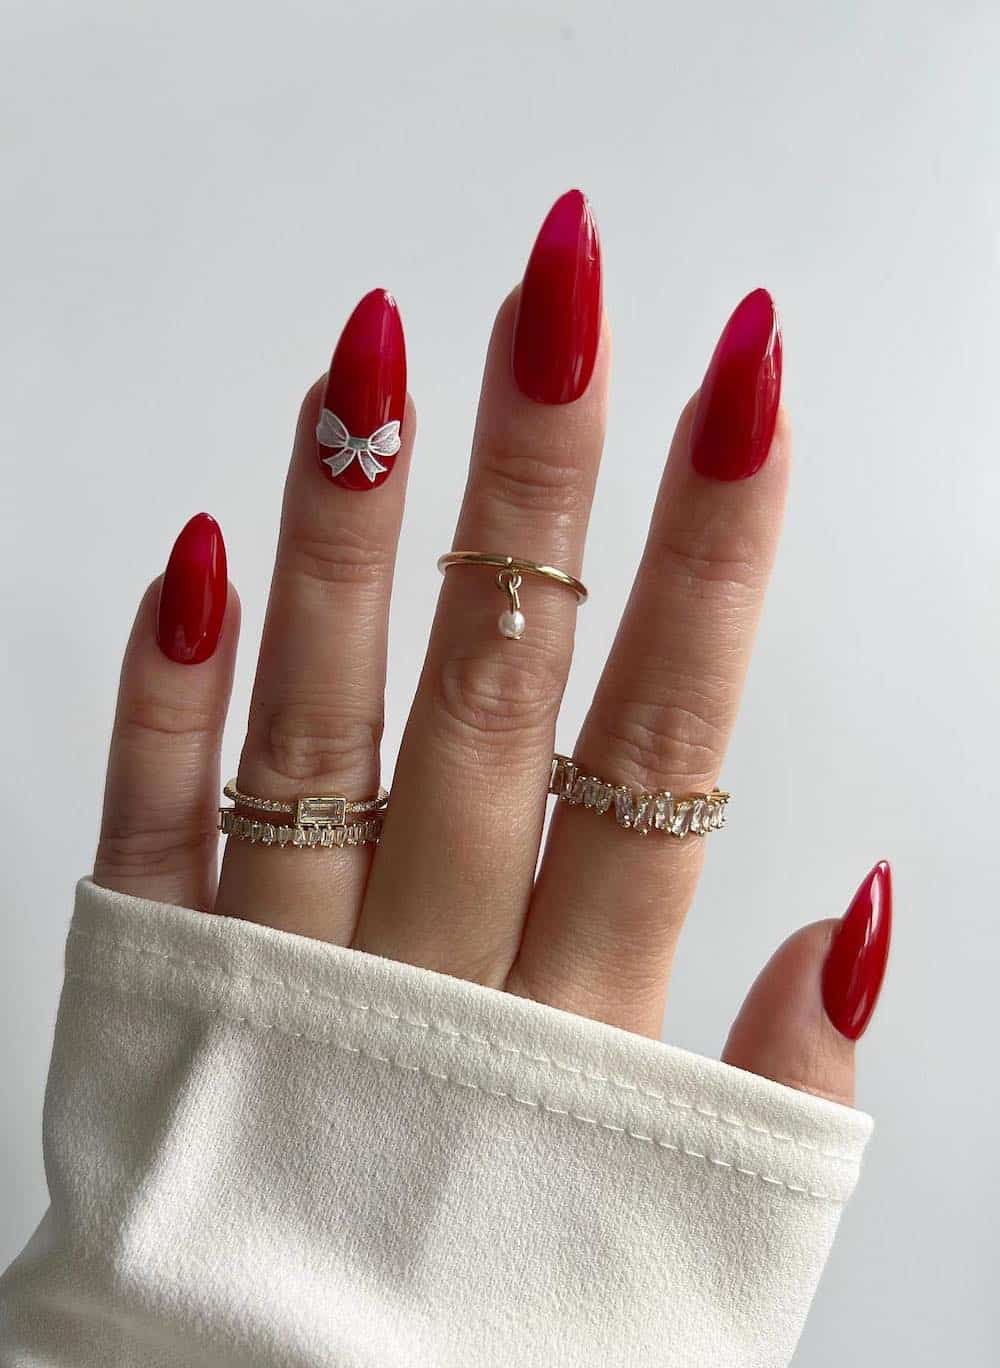 Classic red manicure with white bow accent nail.